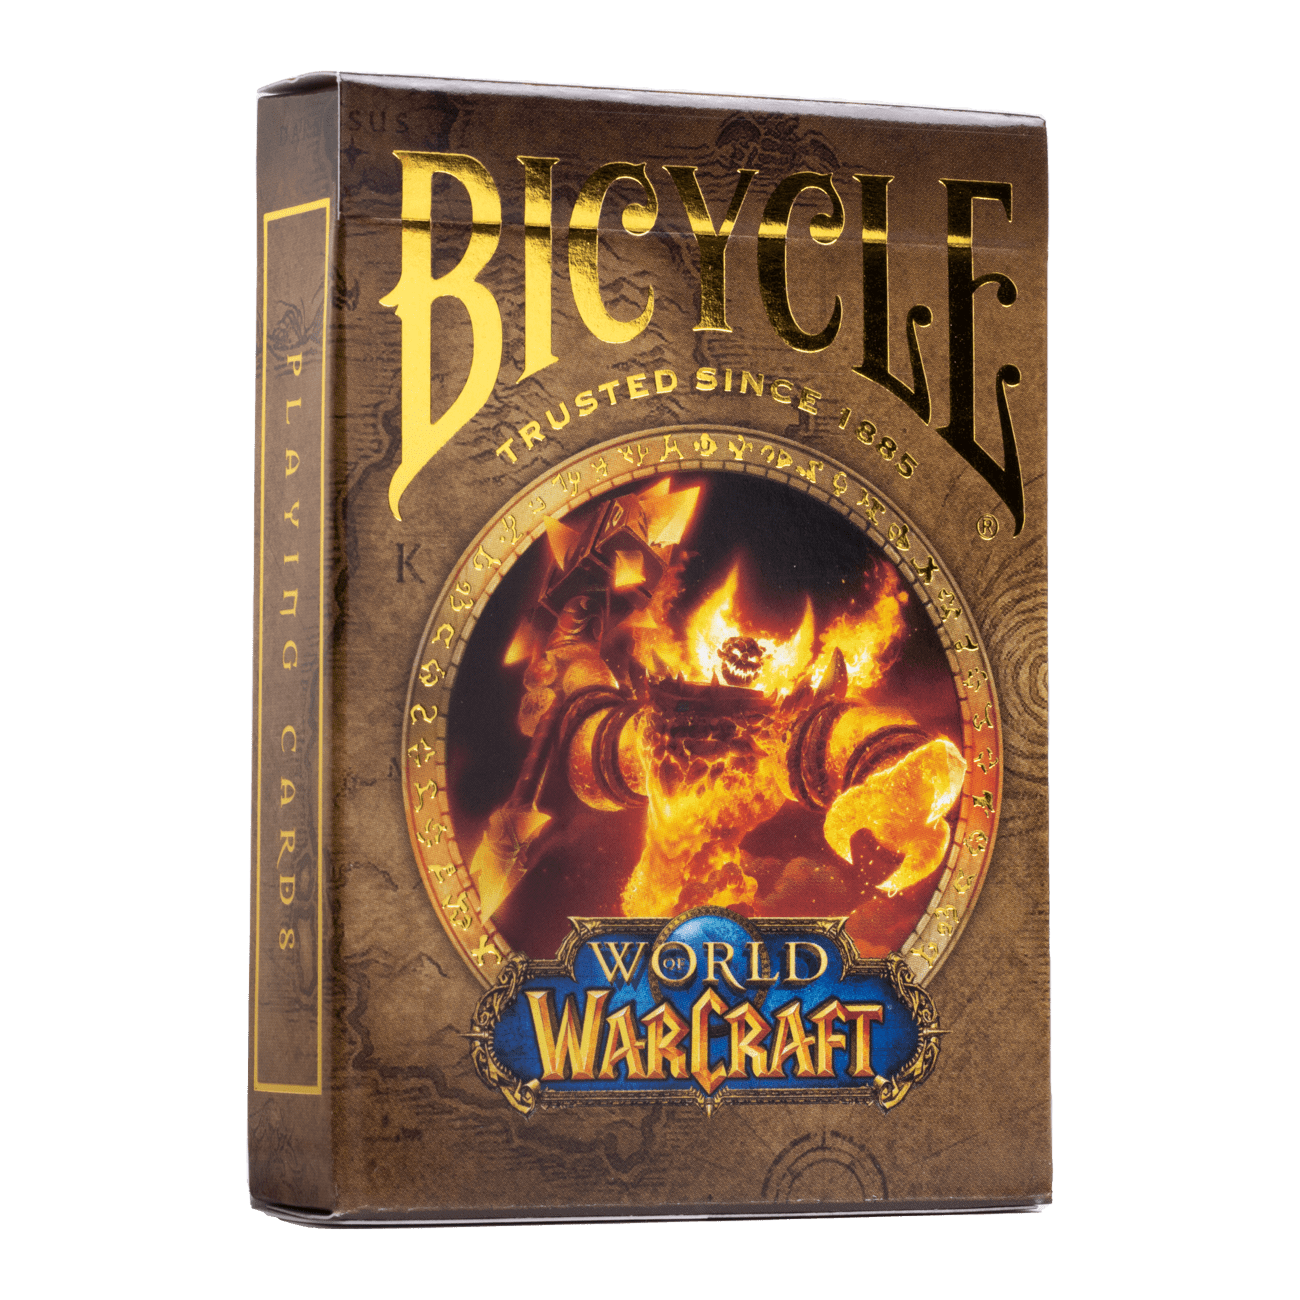 Bicycle: World of Warcraft - Classic